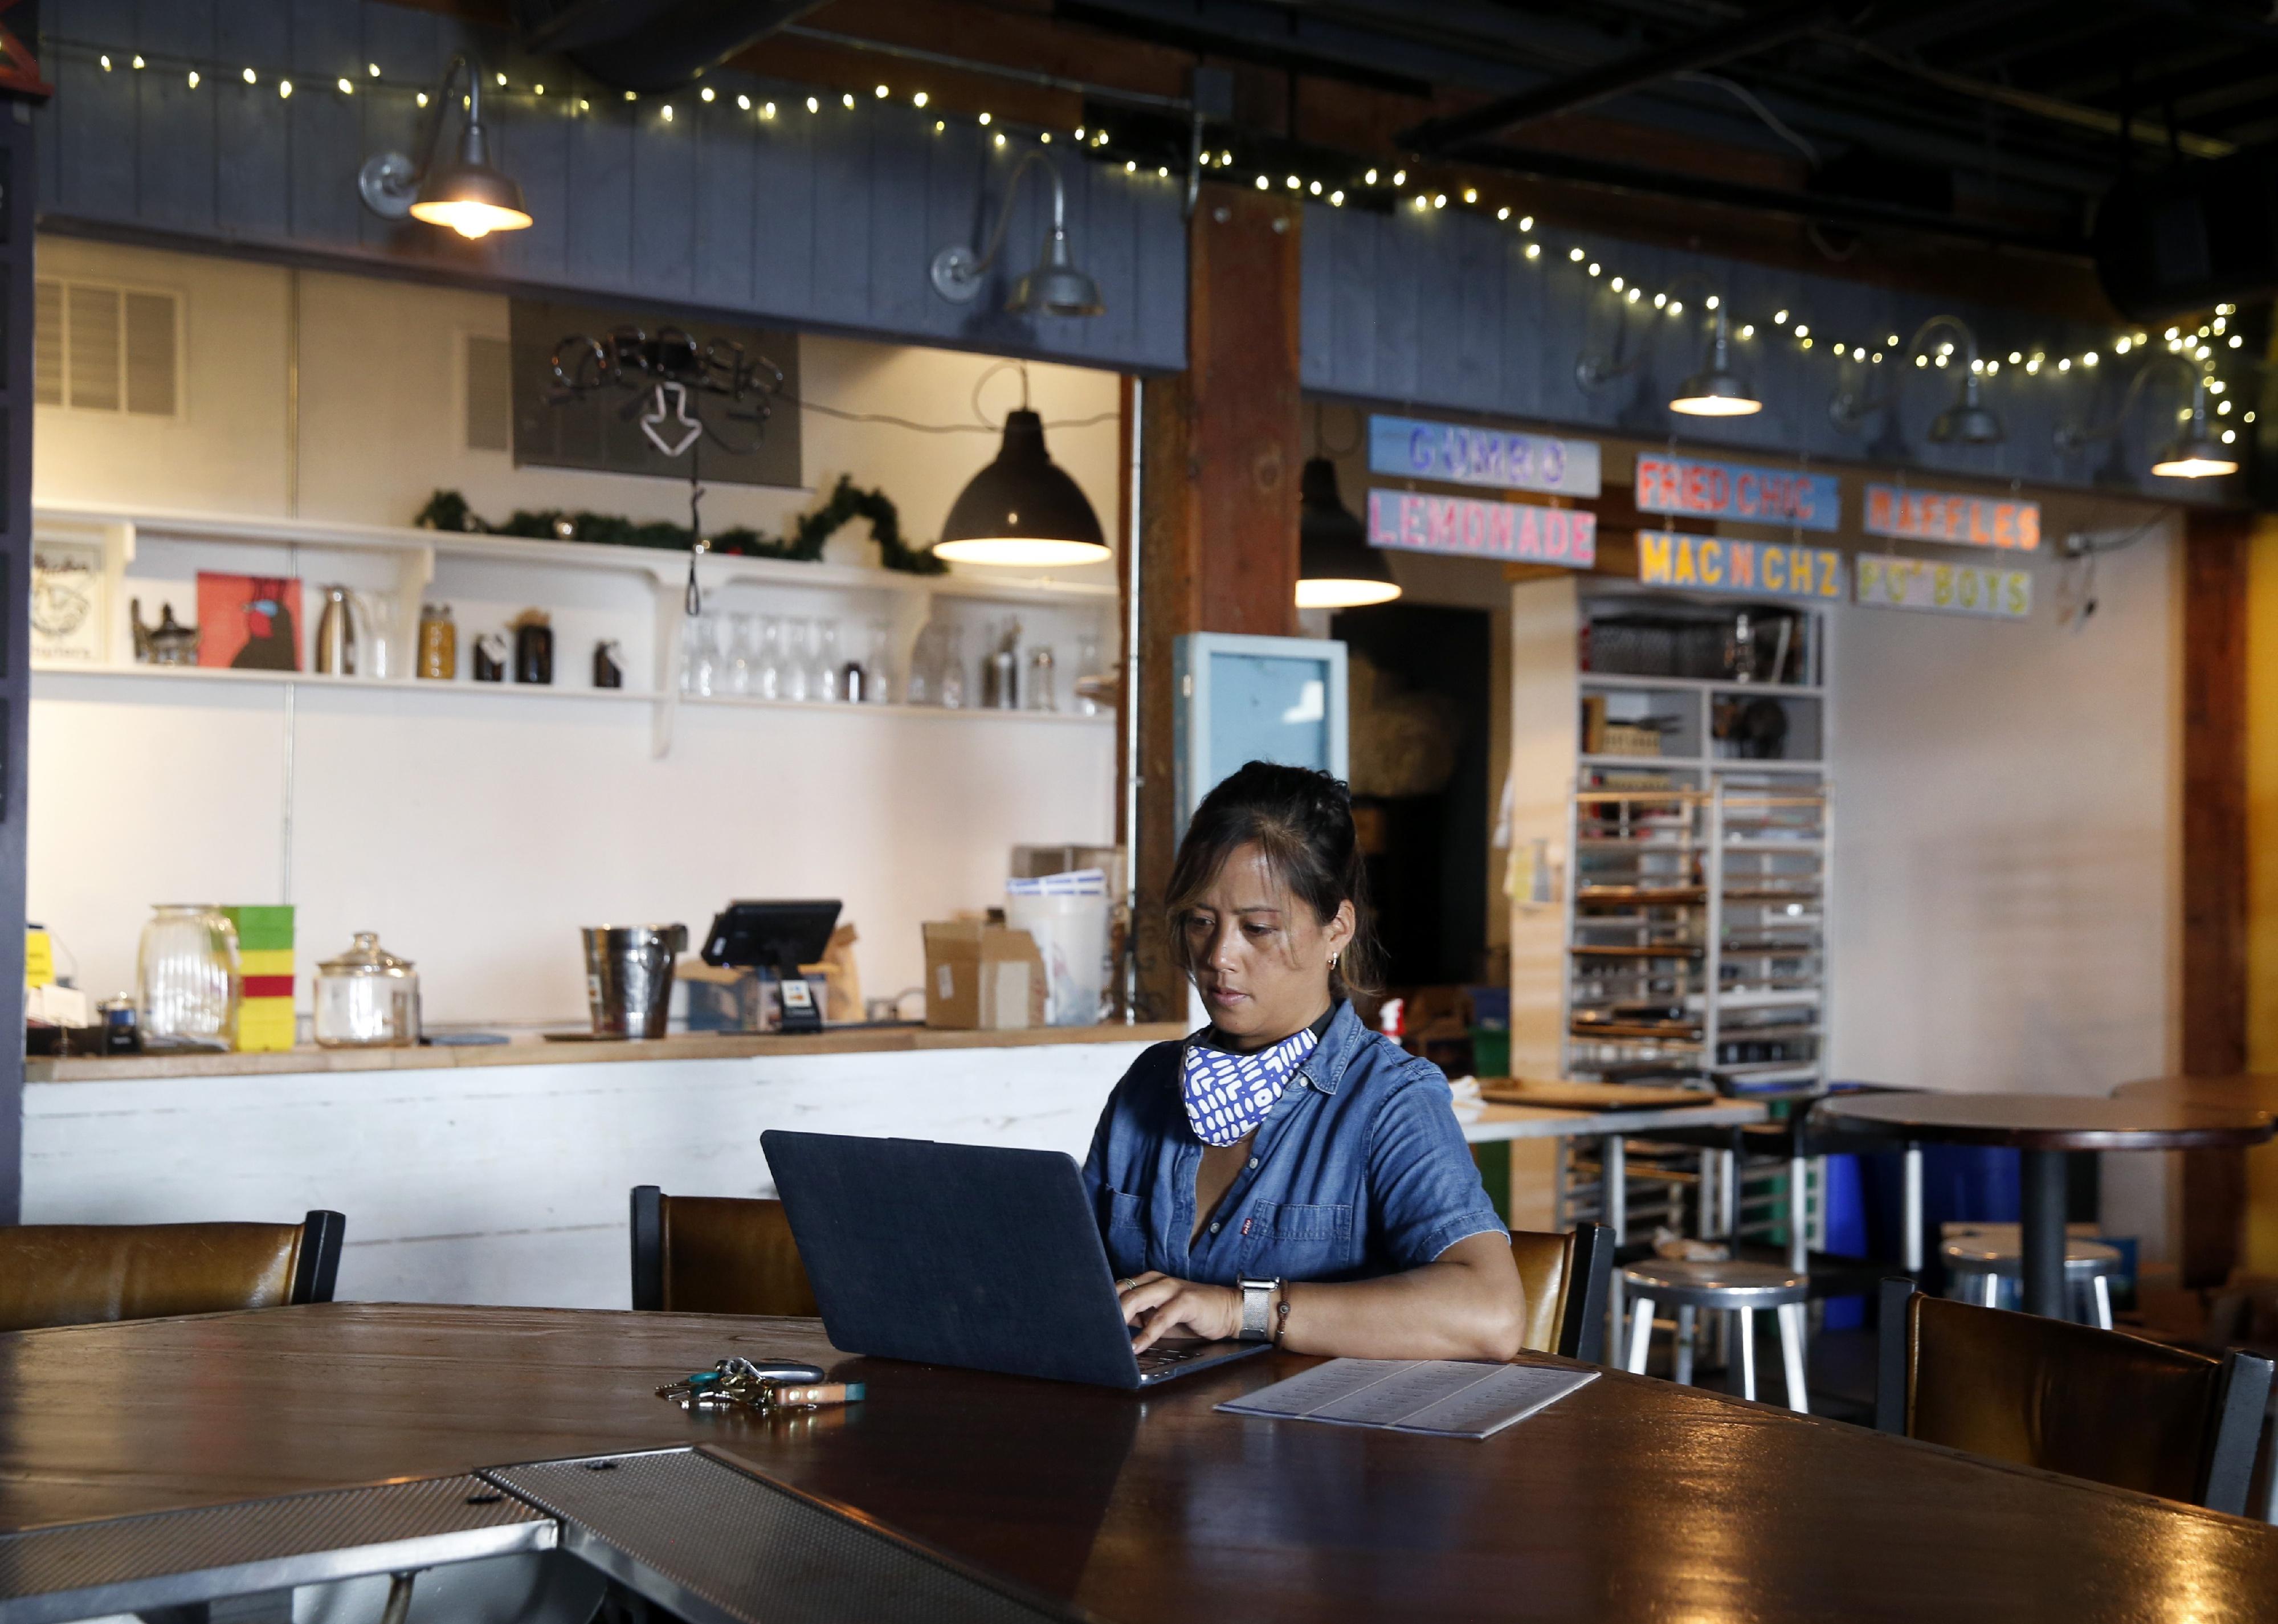 A business owner checks the status of her business loan application on her laptop at her restaurant.